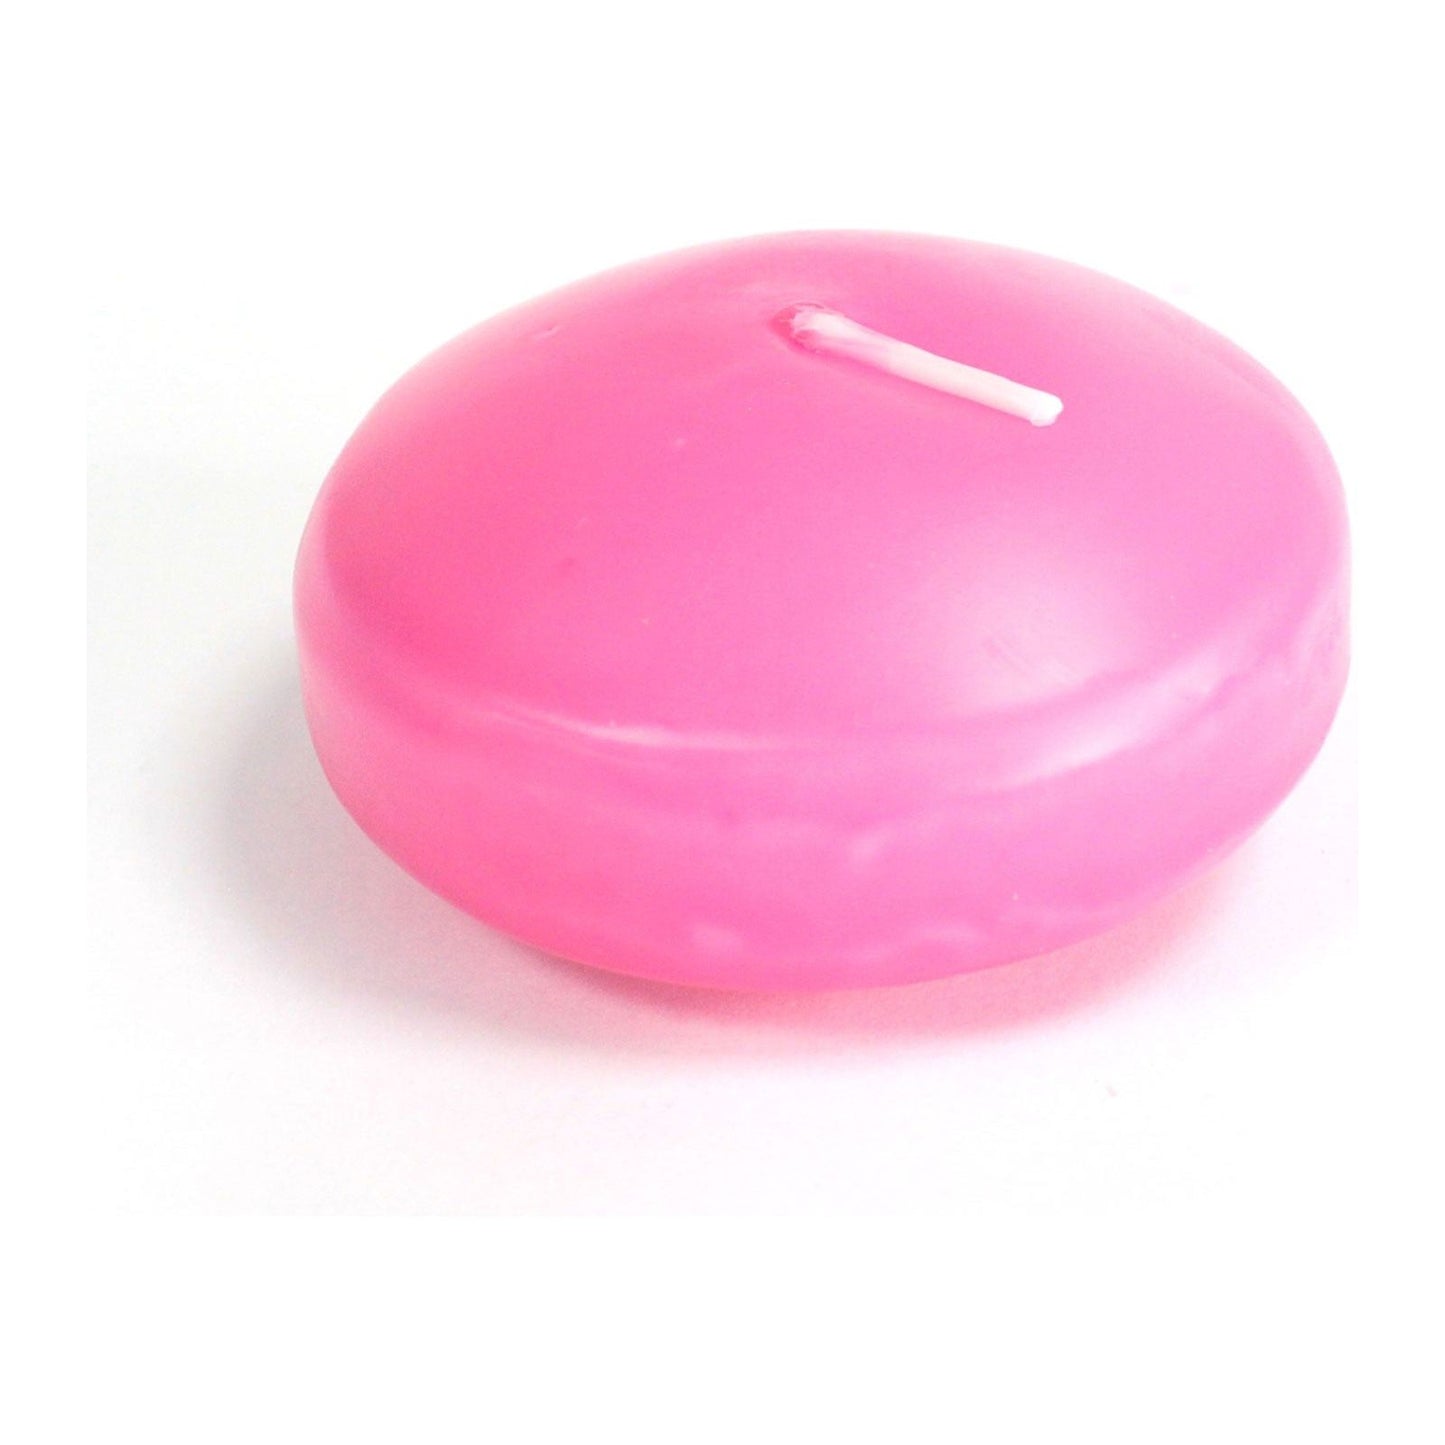 3 x Large Floating Candle - Pink - Ashton and Finch